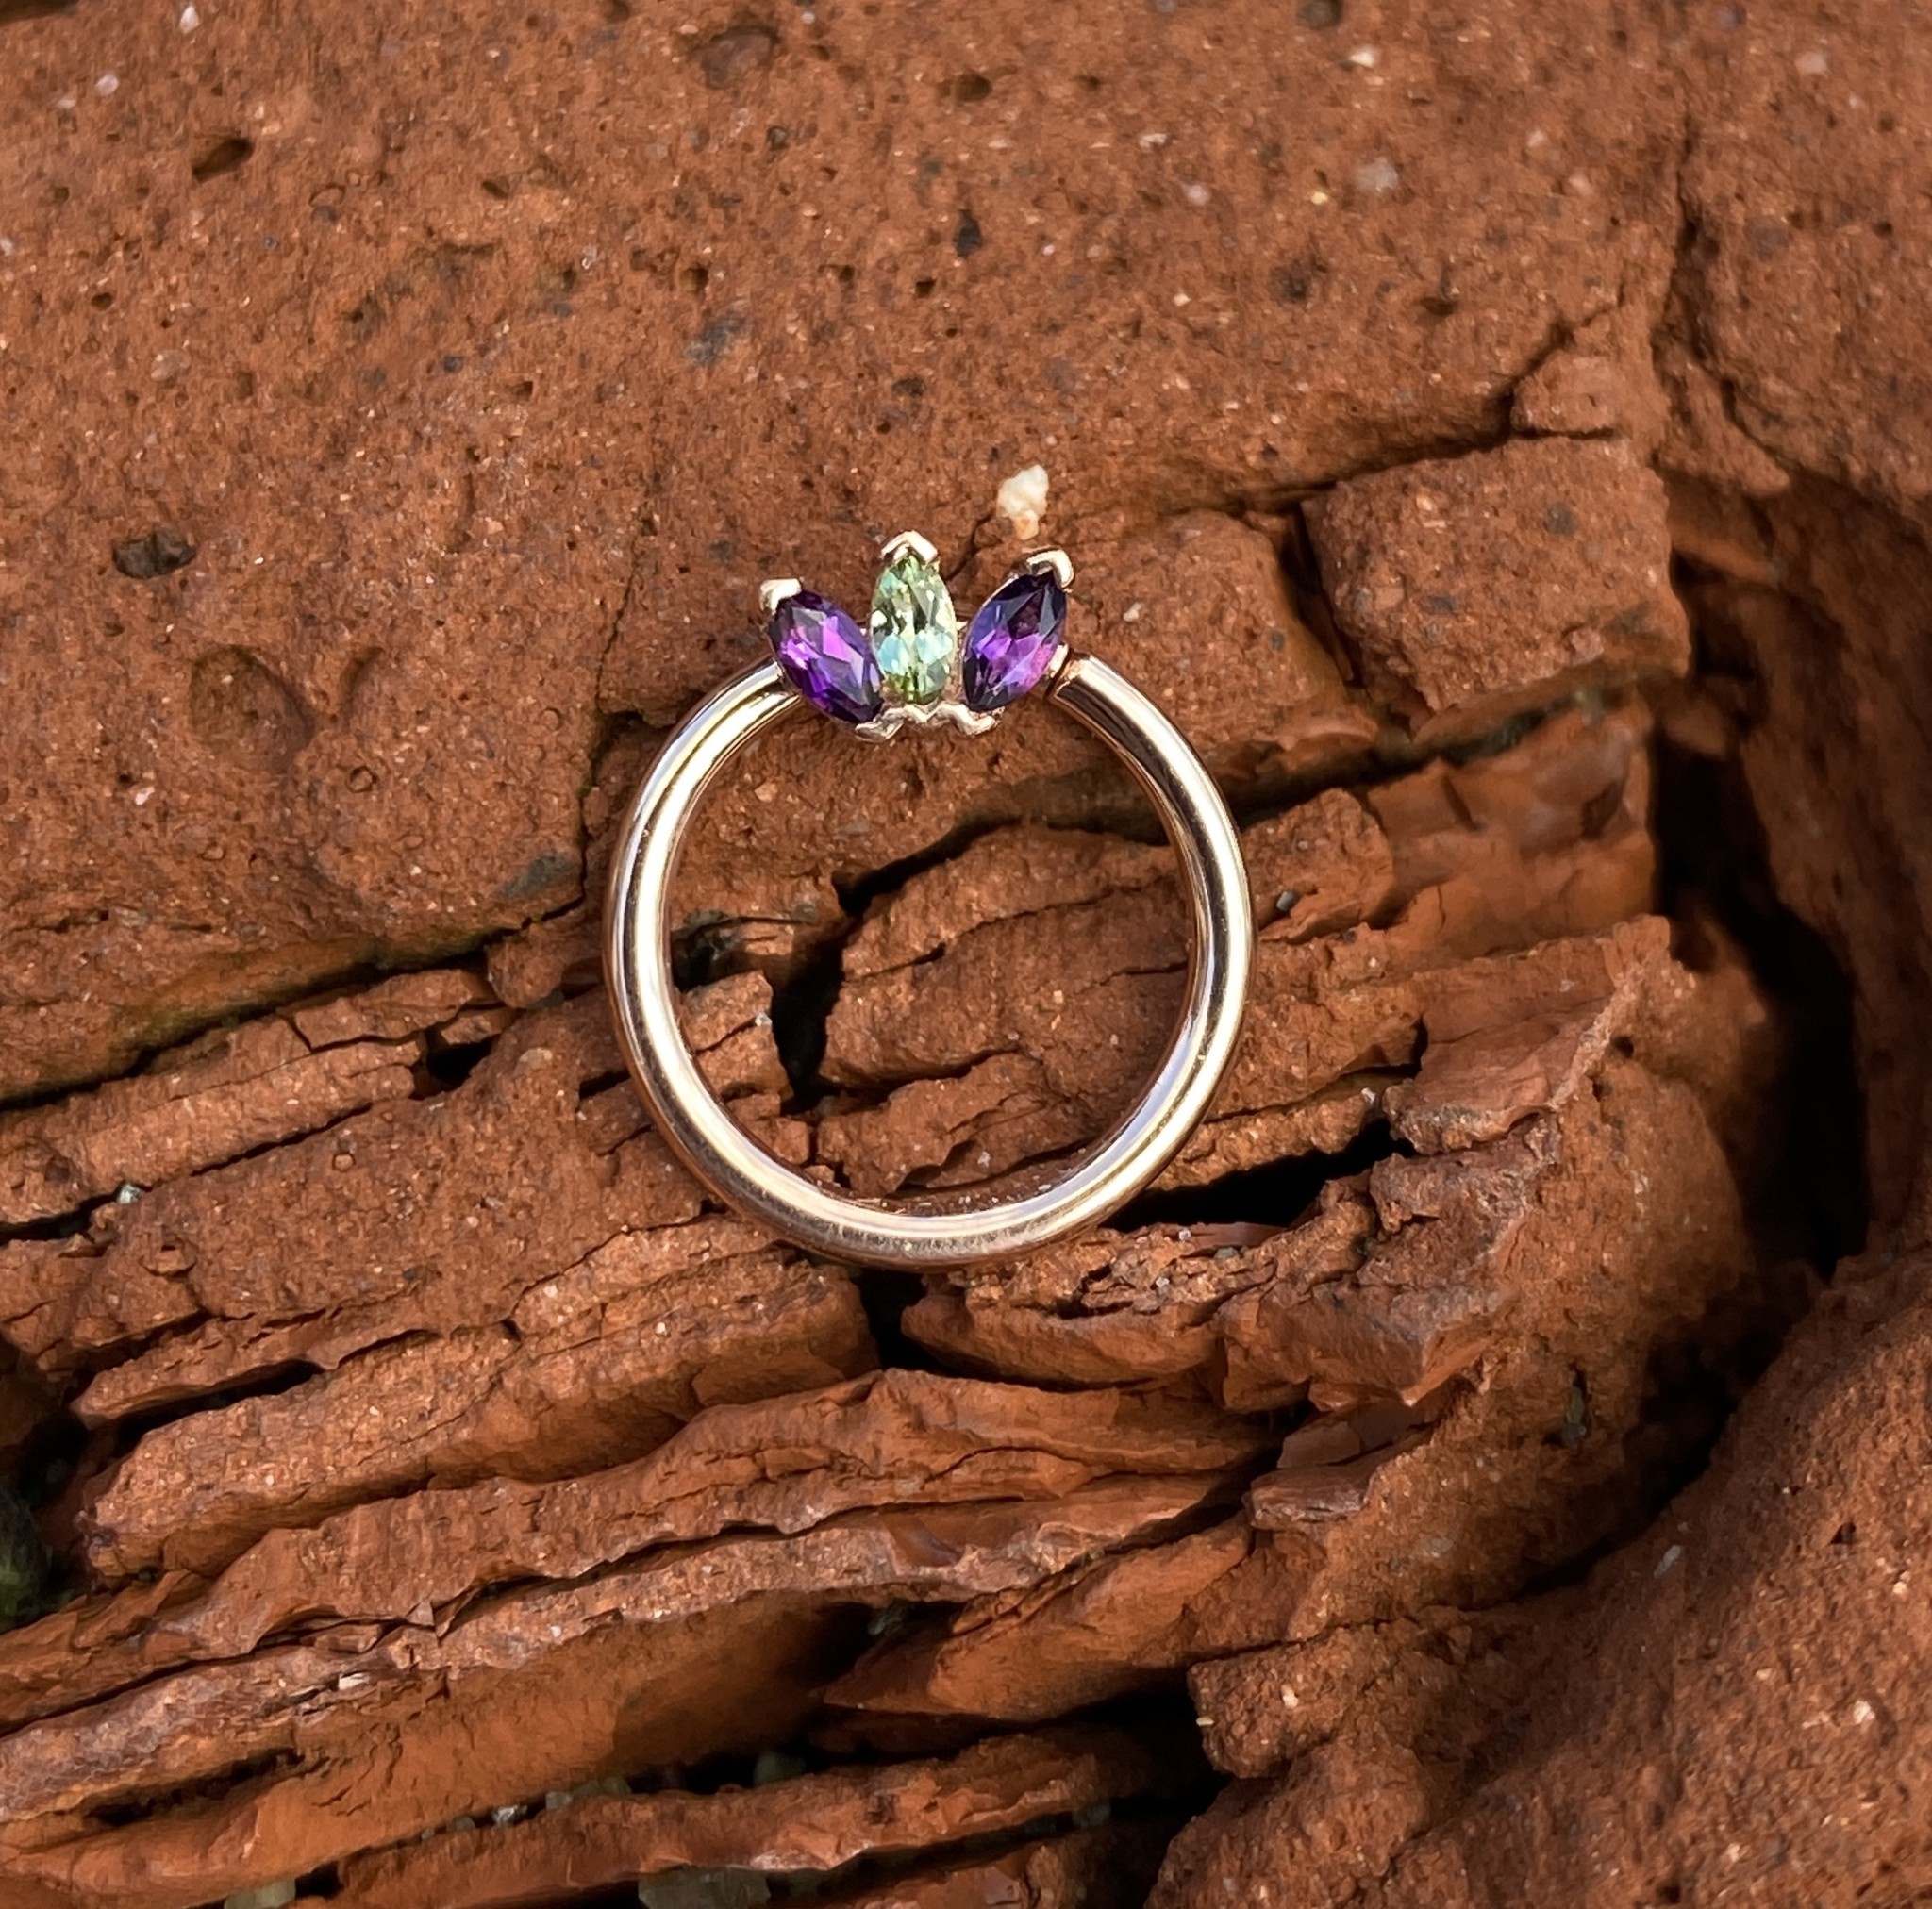 16g 3/8 Marquise Fan Seam Ring with Amethyst & Seafoam Tourmaline by BVLA